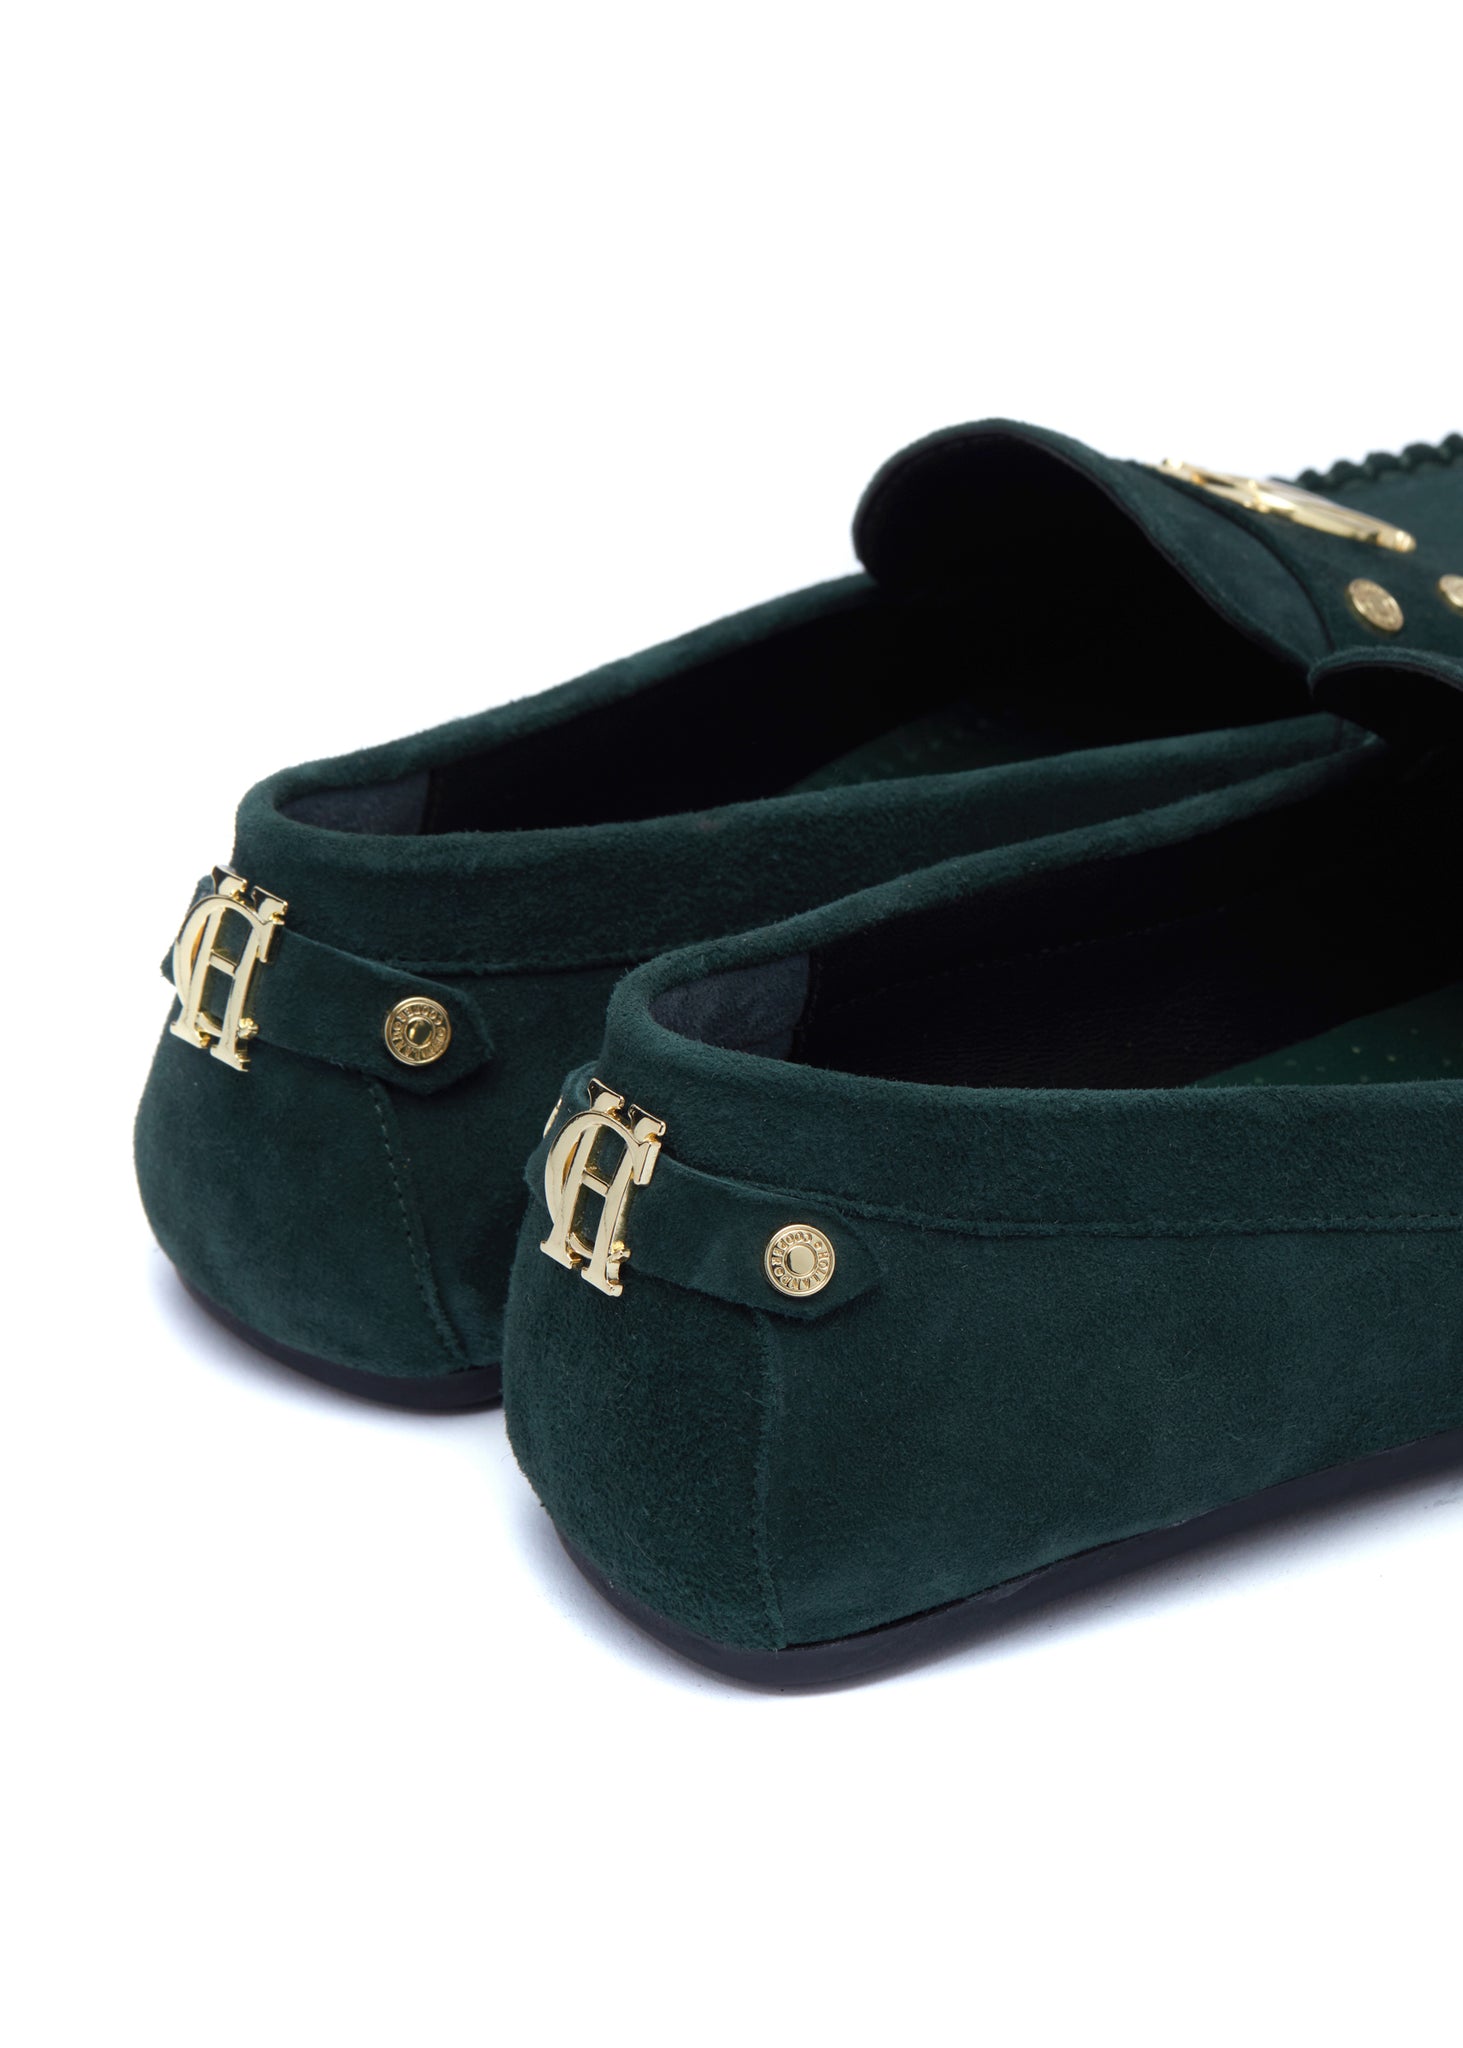 Back of classic emerald green suede loafers with a leather sole and top stitching details and gold hardware with a dark green inner sole